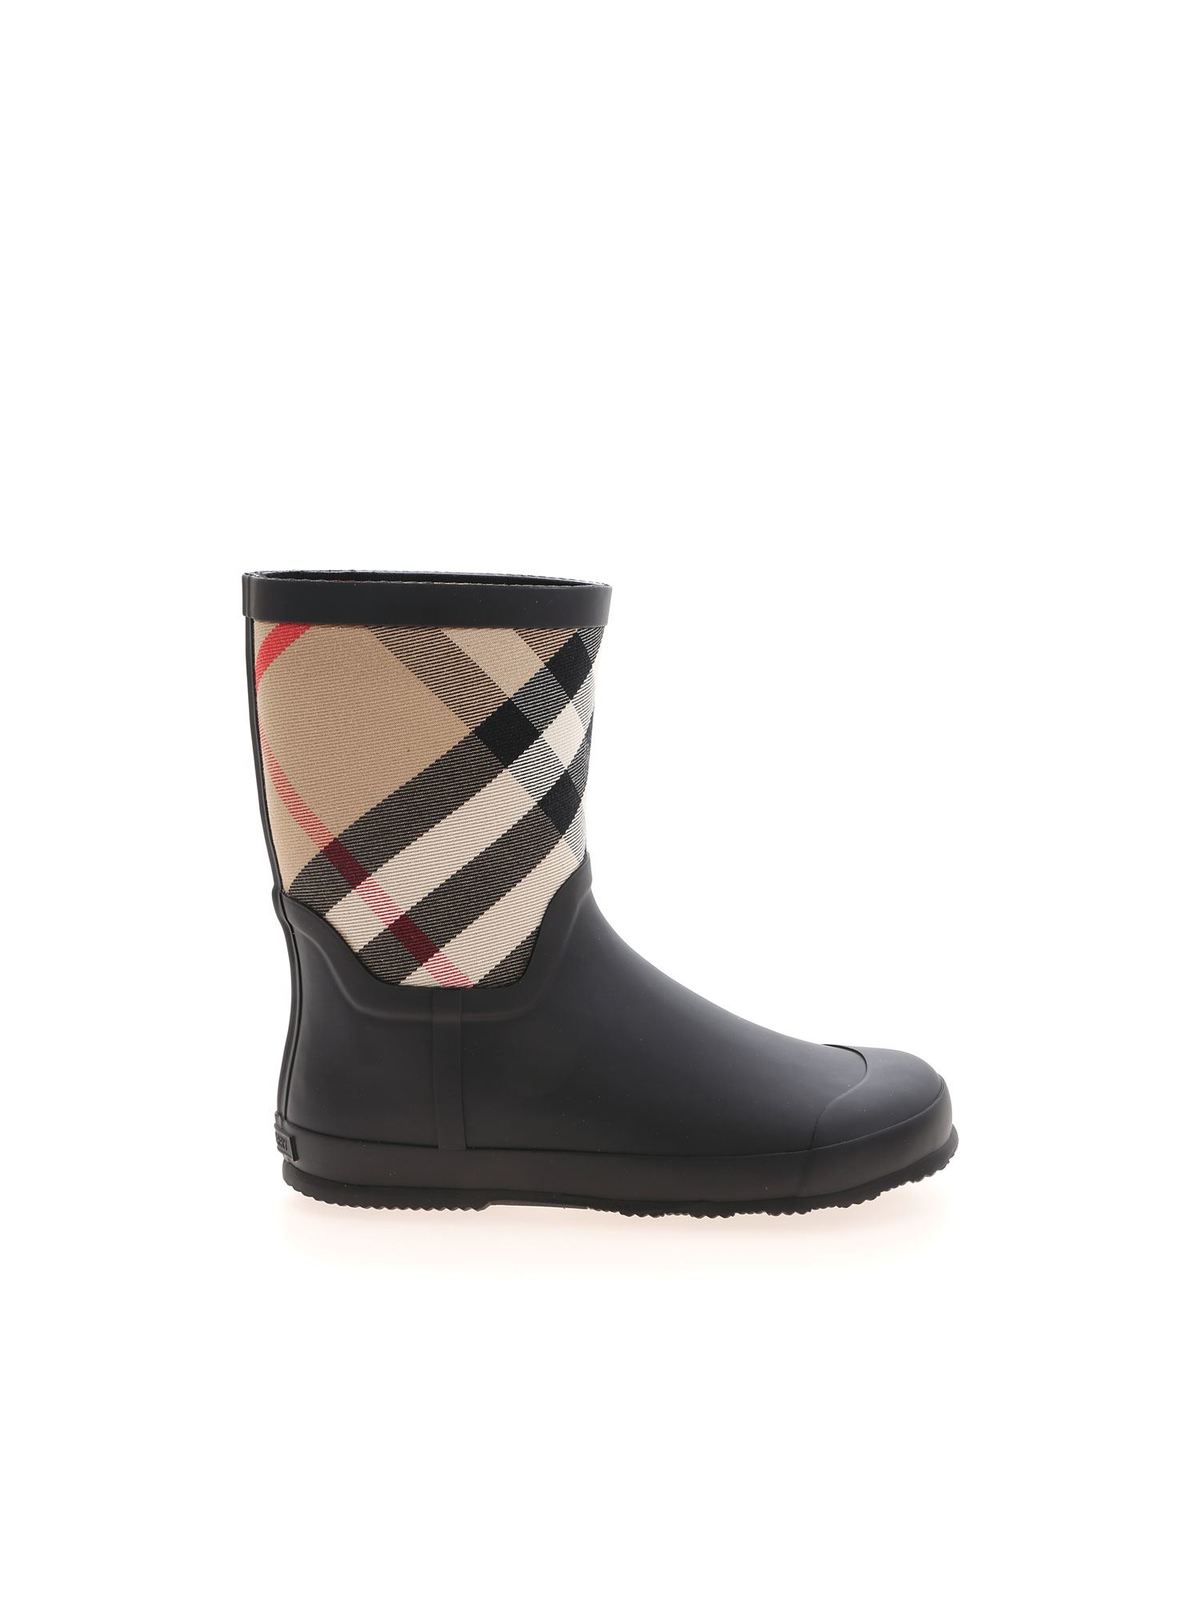 Step Out in Style: Burberry Ranmoor Boots